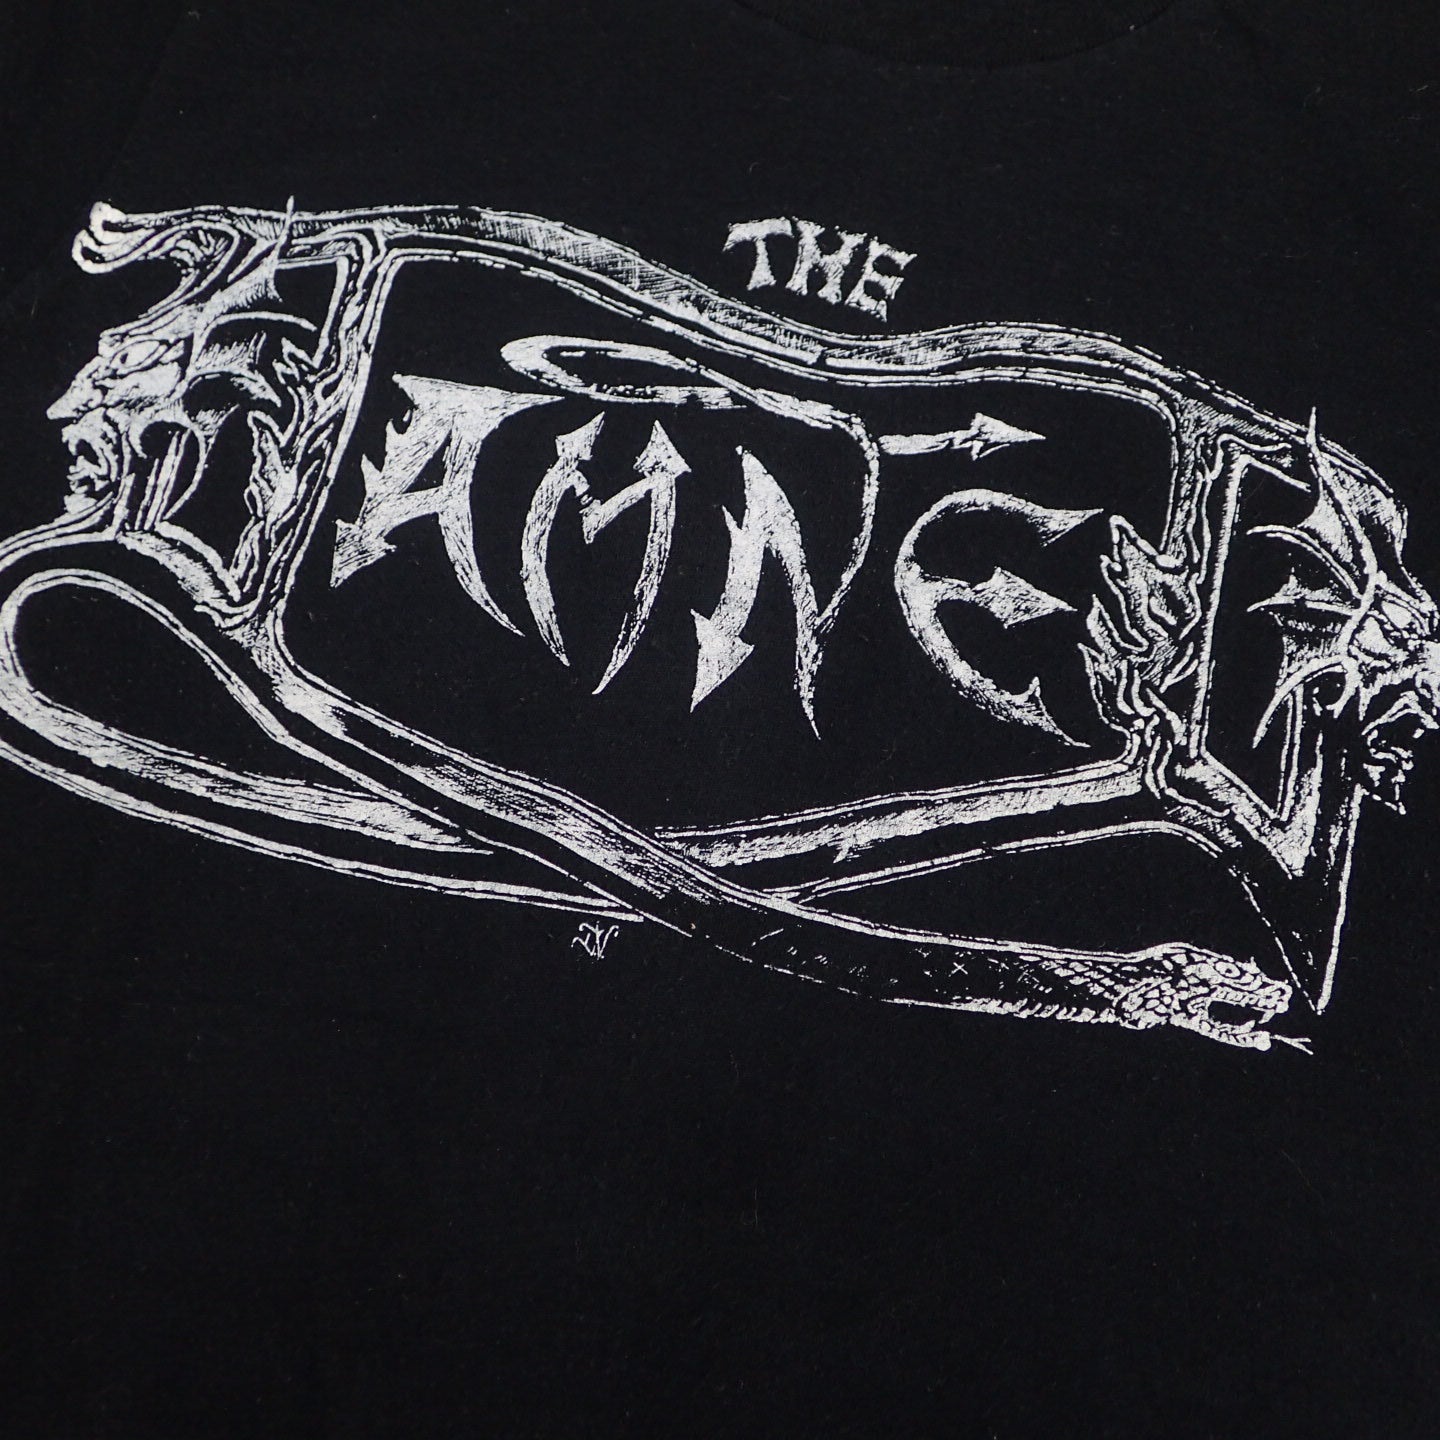 80s The Damned T-shirt "The Black Album Tee"